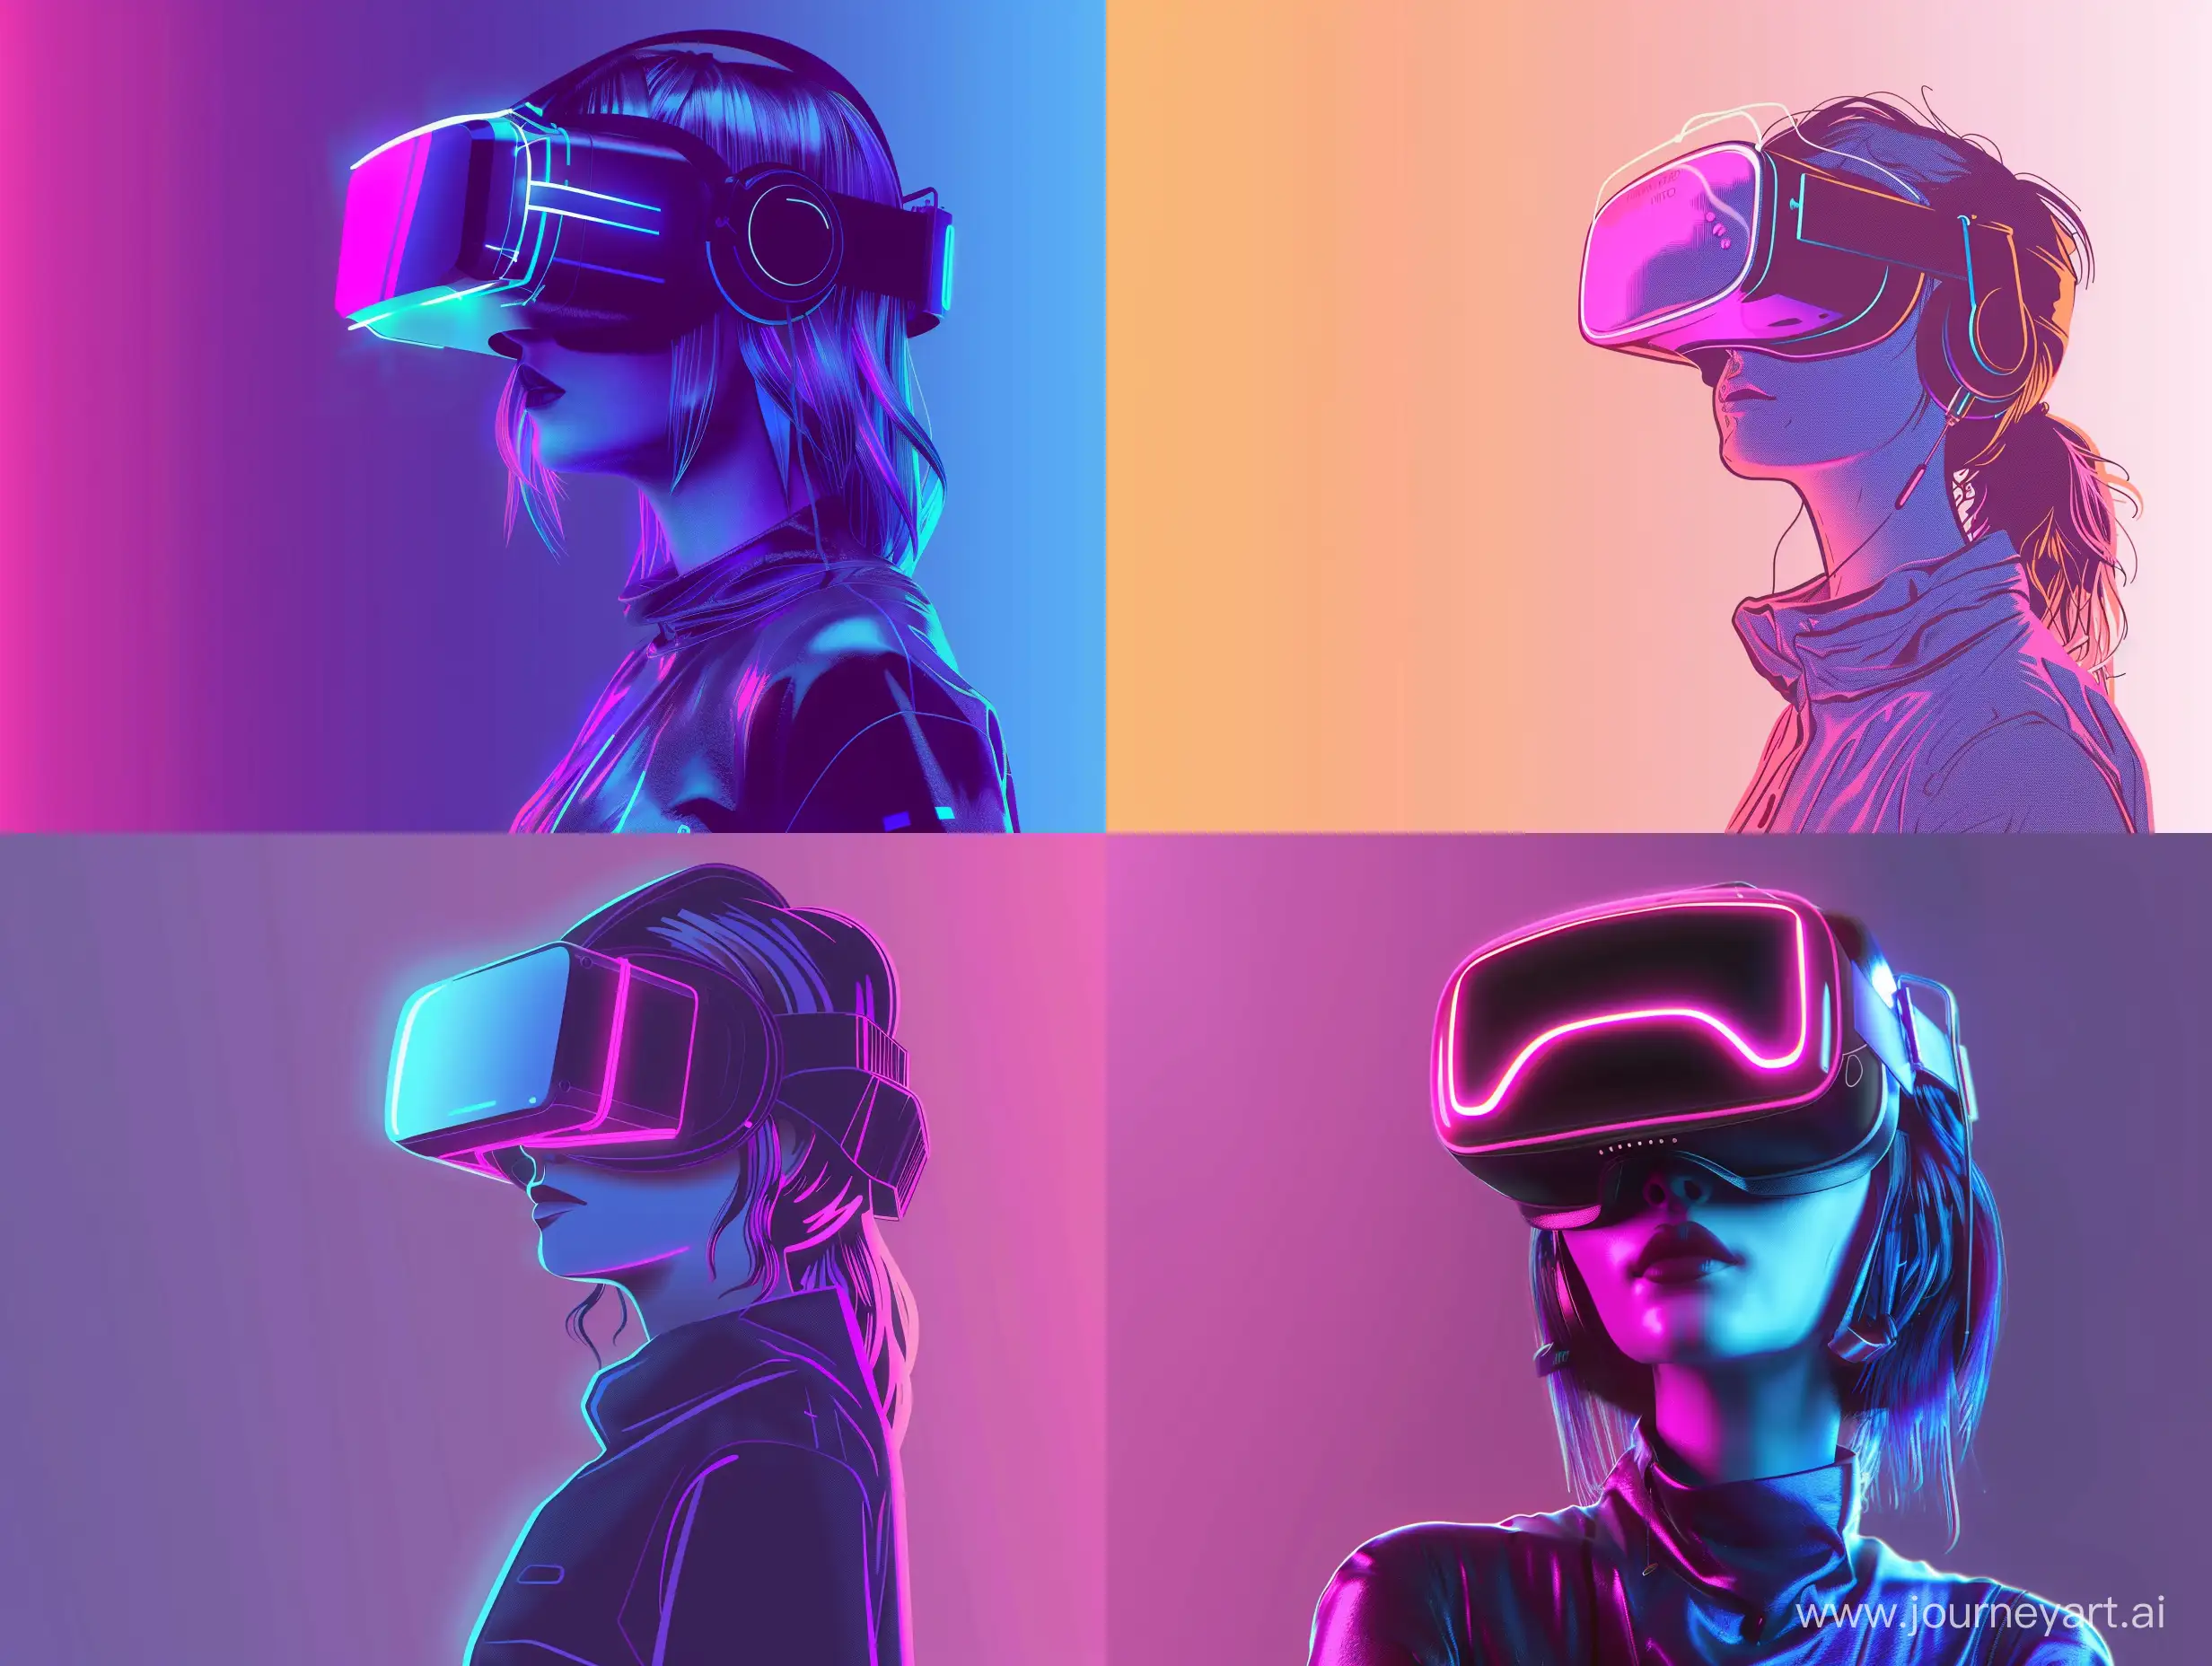 Futuristic-Cyberpunk-Girl-immersed-in-Virtual-Reality-with-Subtle-Neon-Glow